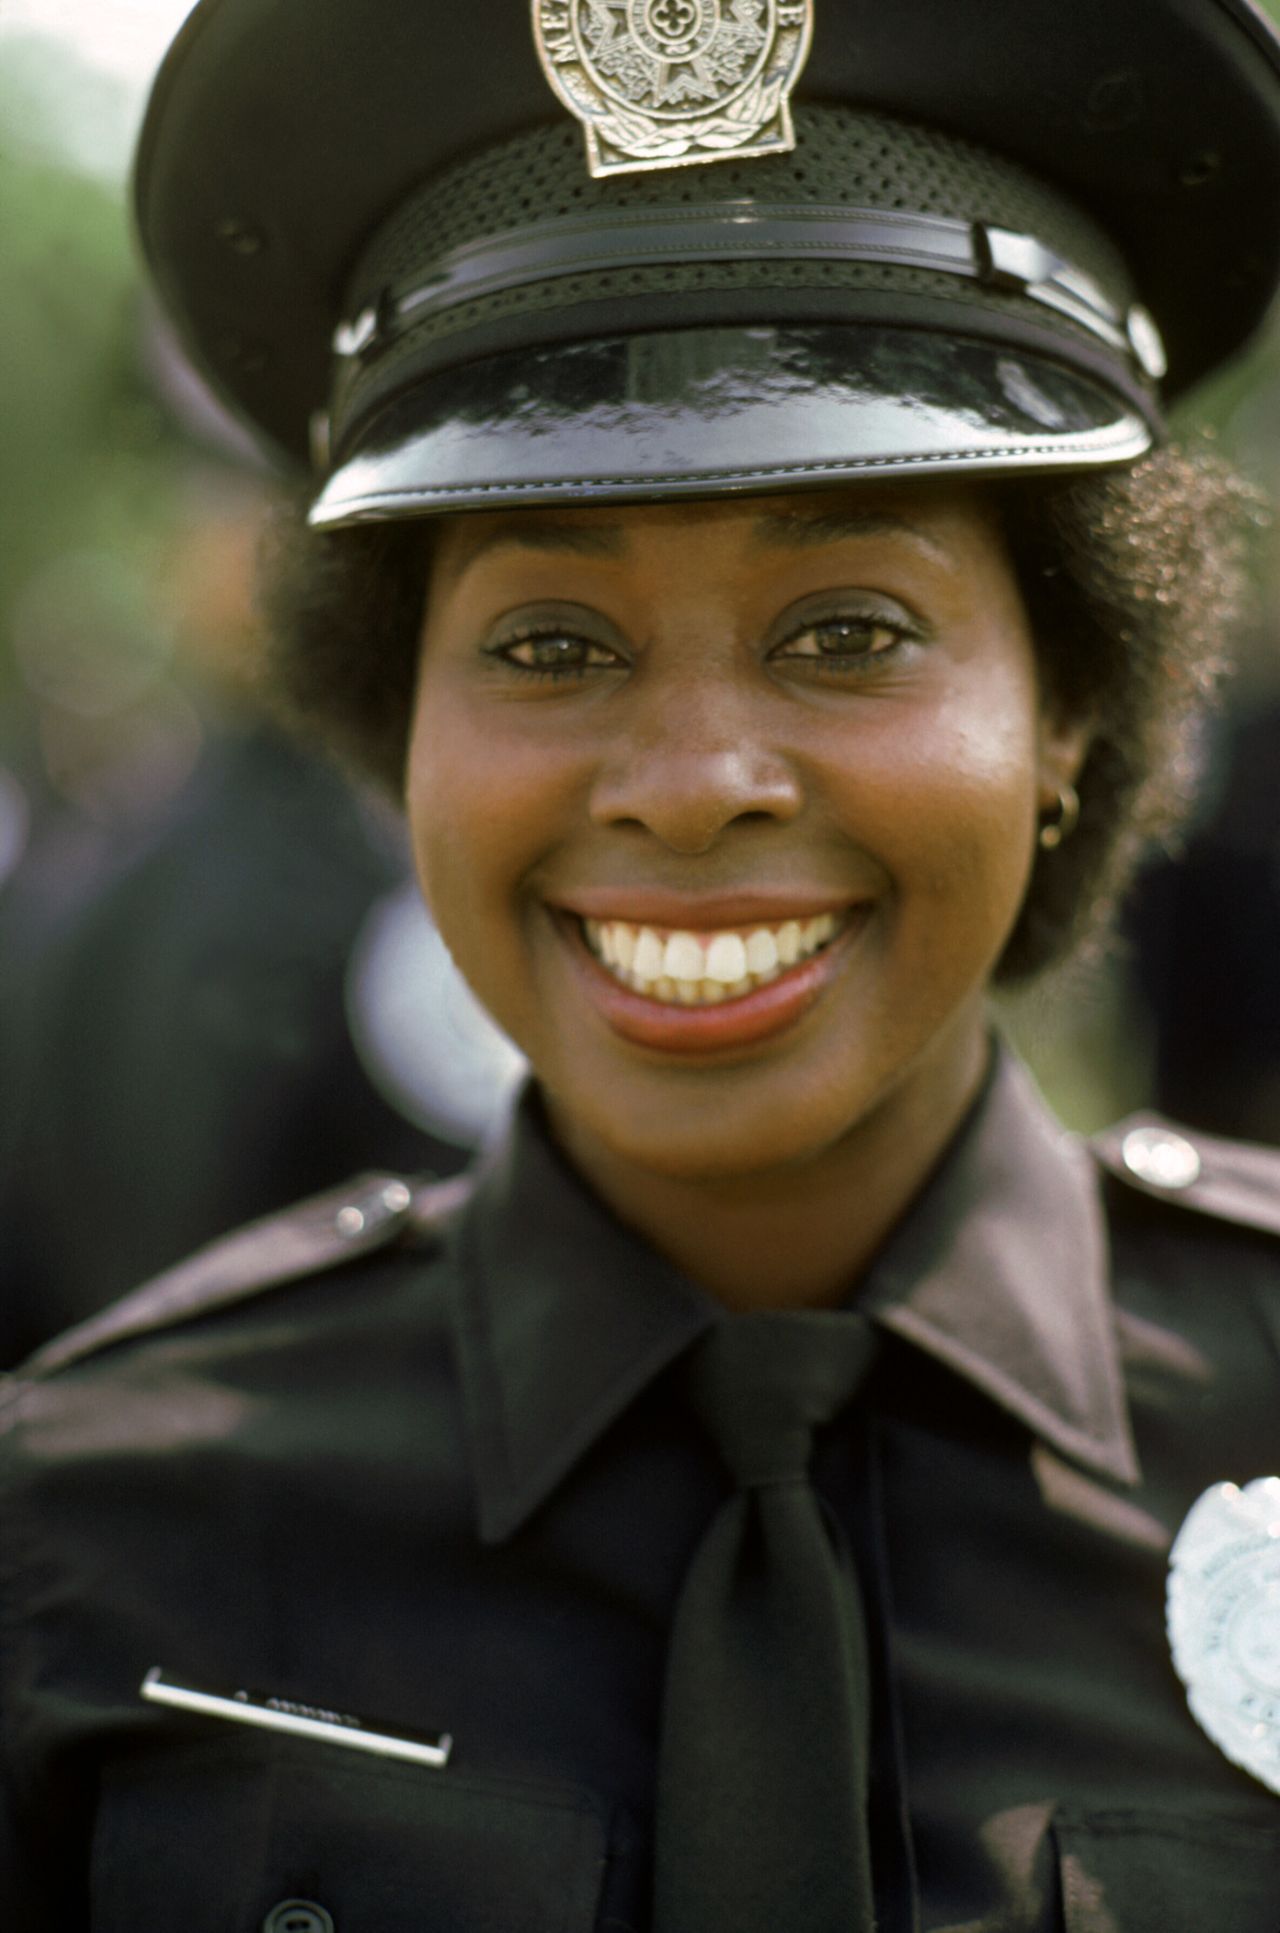 <a href="https://www.cnn.com/2021/01/08/entertainment/marion-ramsey-obituary-trnd/index.html" target="_blank">Marion Ramsey,</a> the actress best known for her role as Officer Laverne Hooks in the film franchise "Police Academy," died January 7 at the age of 73.